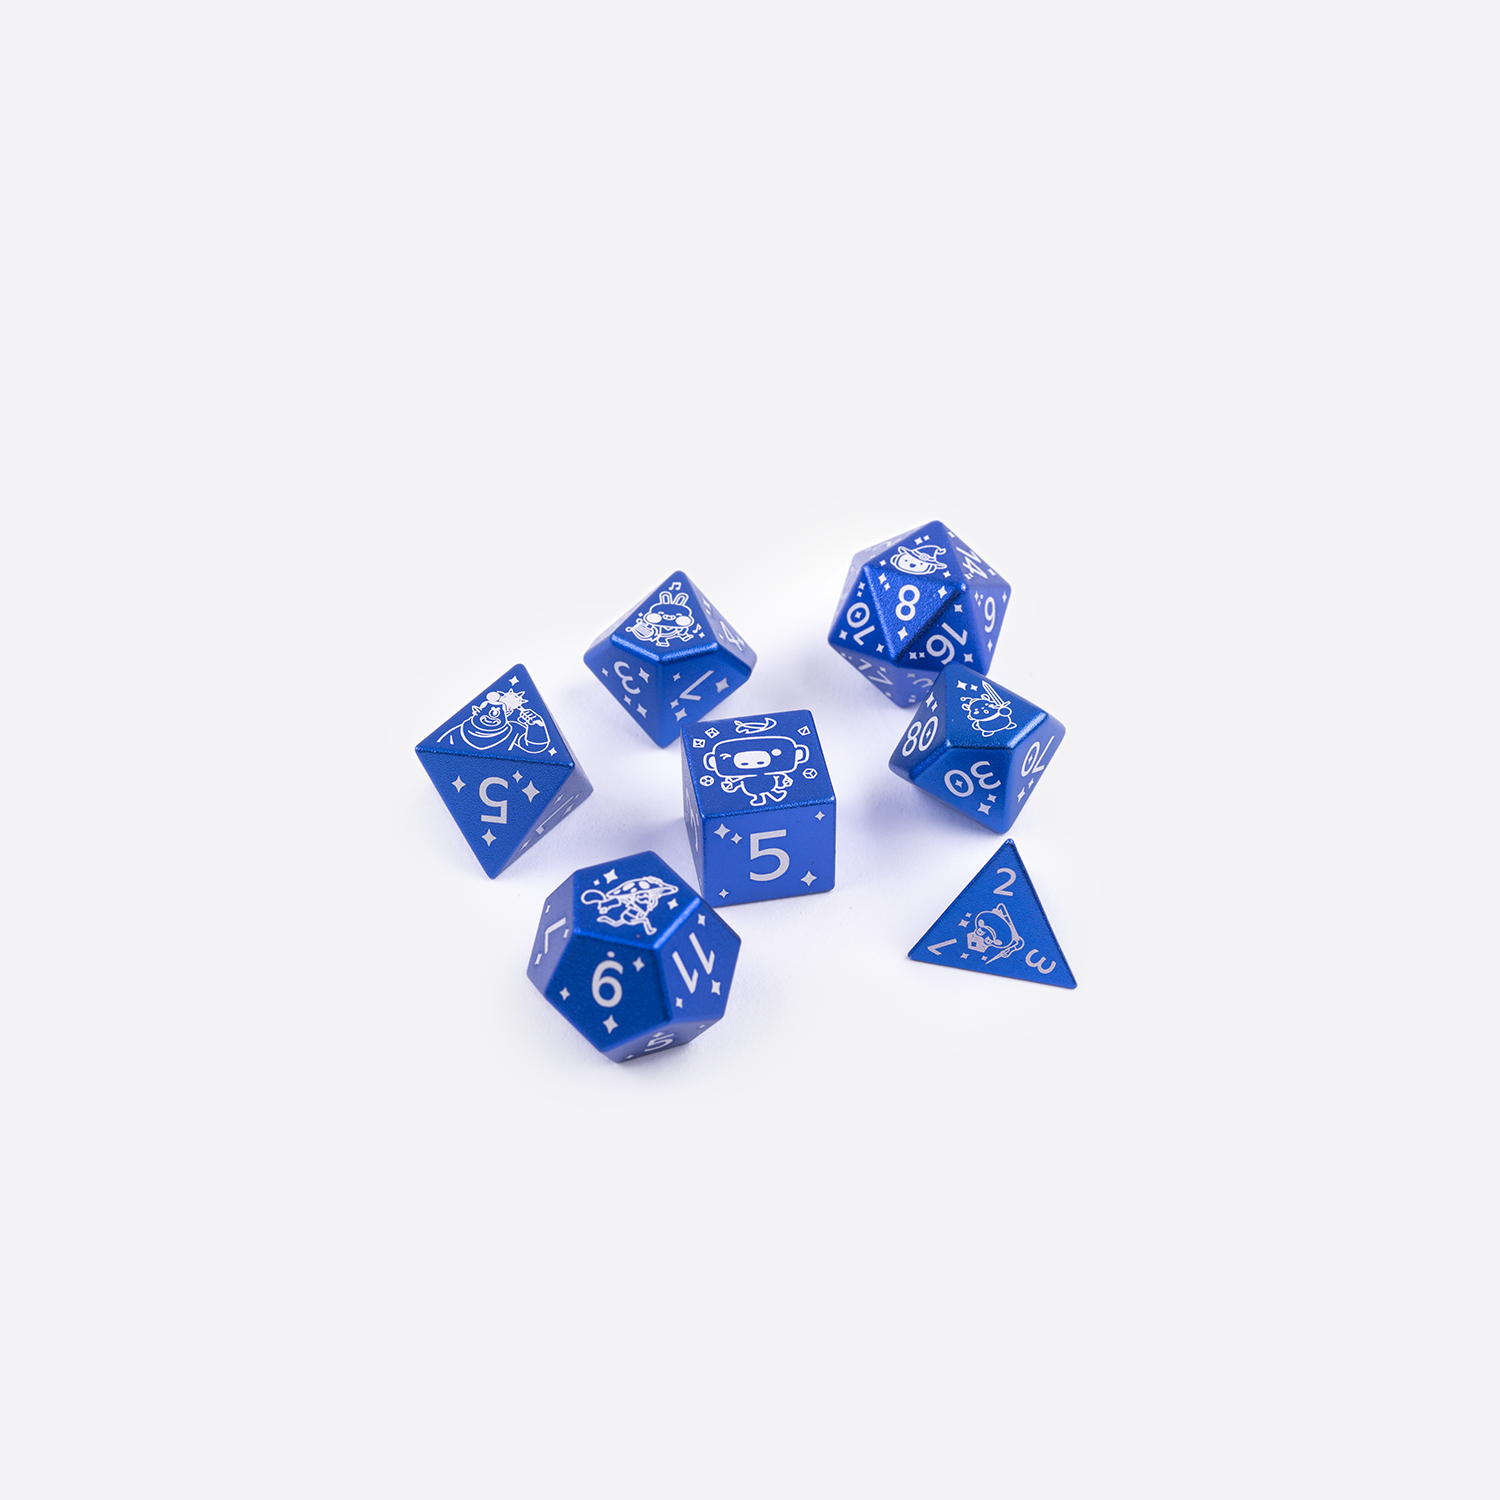 Roll for Sandwich Official Dice Set